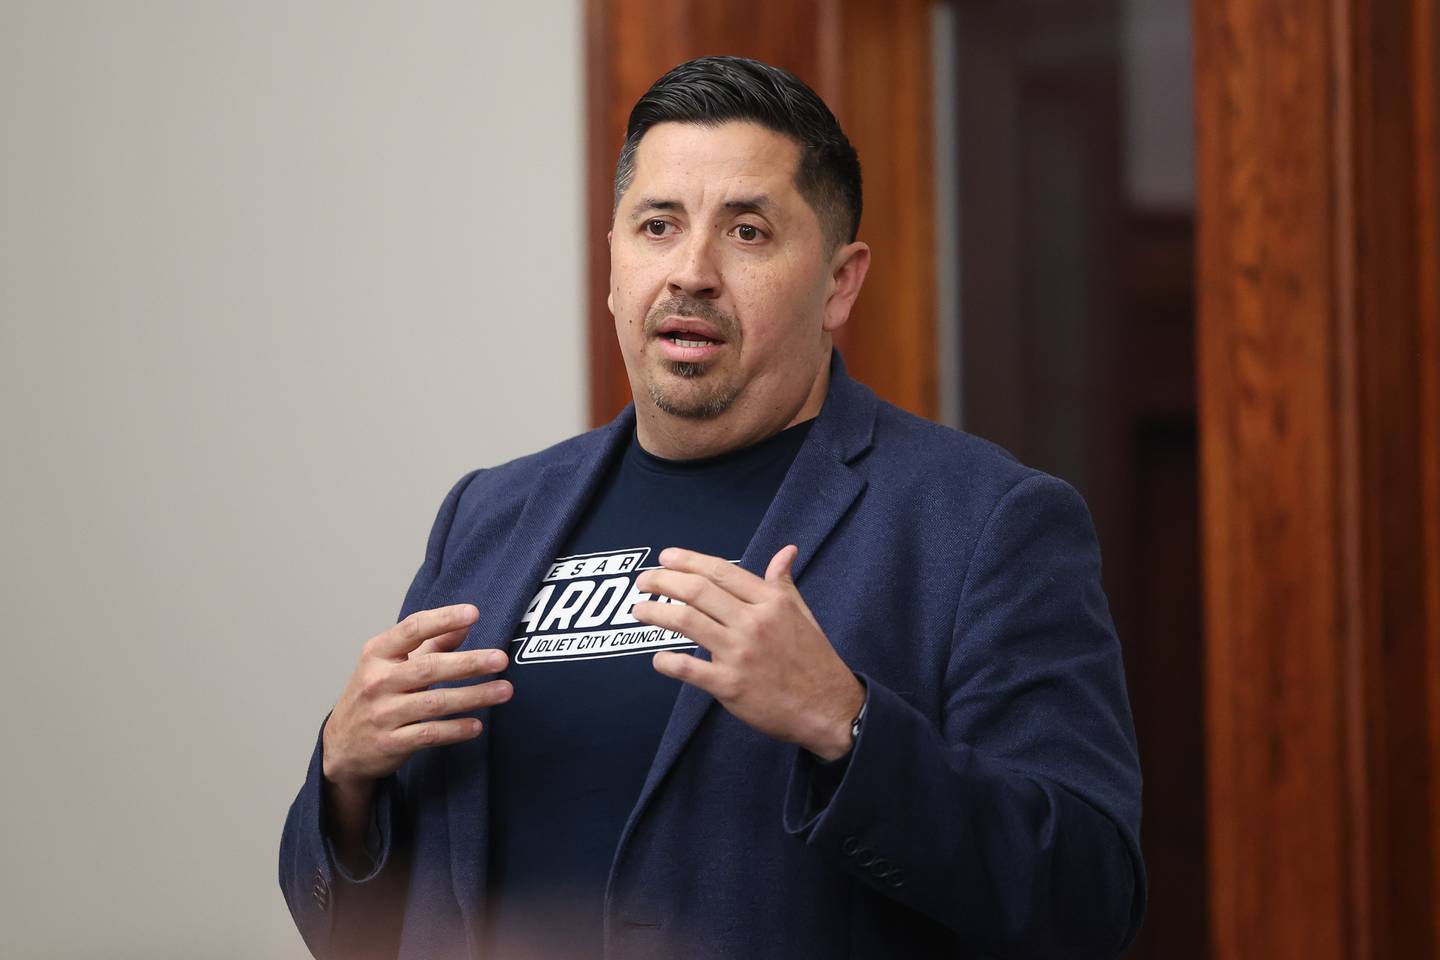 Candidate for Joliet City Council District 4 Cesar Cardenas speaks at a forum for the candidates at the Joliet Public Library on Thursday, March 9th, 2023 in Joliet.